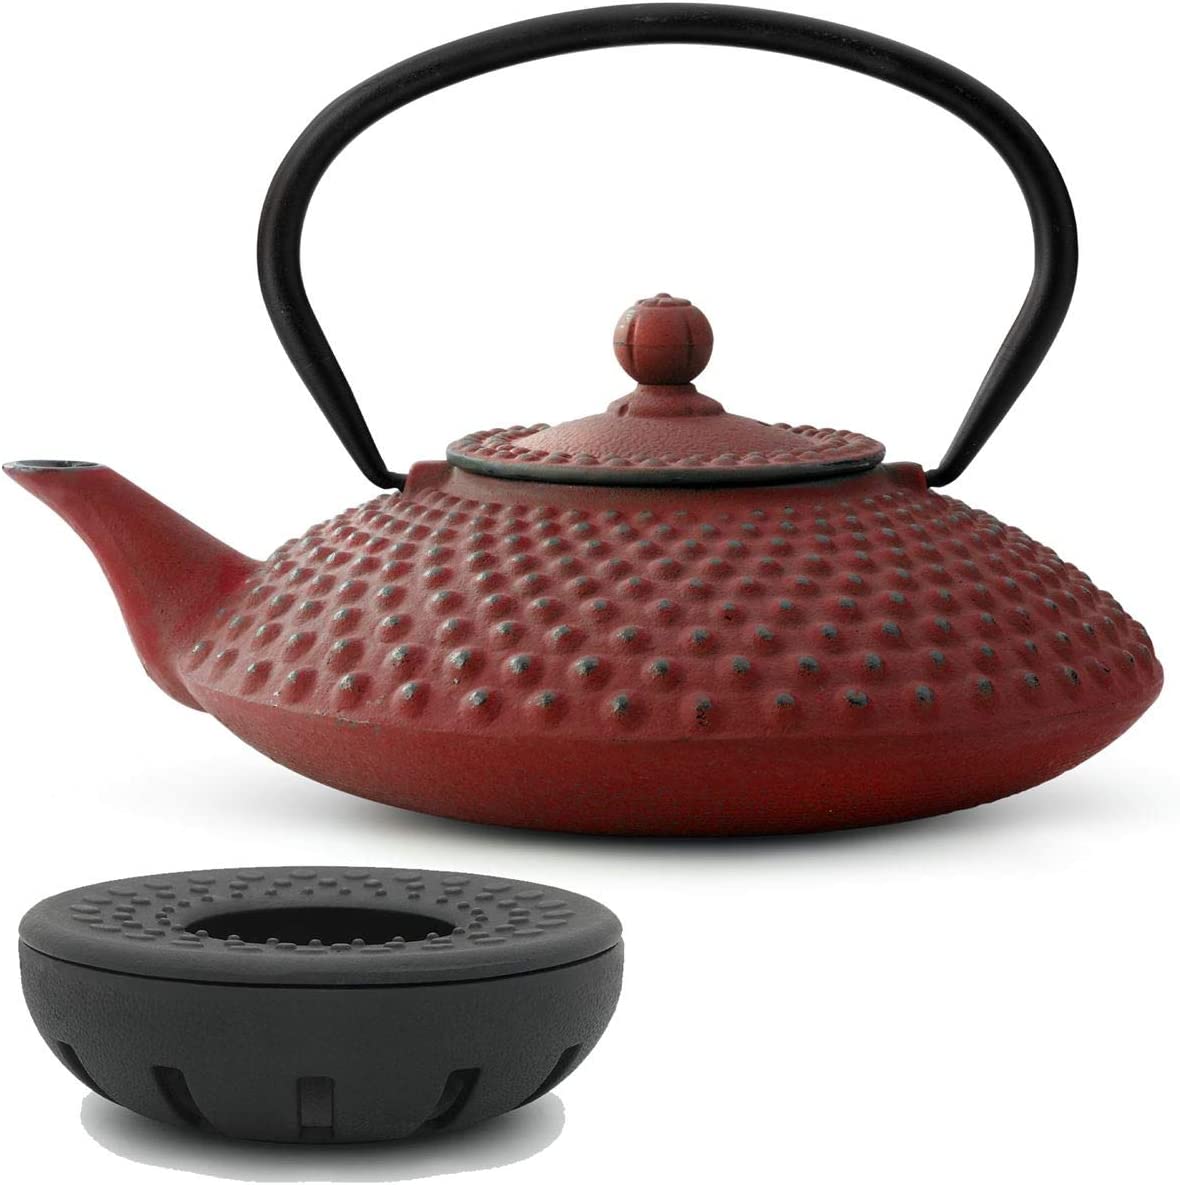 Bredemeijer Asian Cast Iron Teapot Set 1.25 Litres Red with Tea Filter Strainer and Cast Iron Teapot Warmer